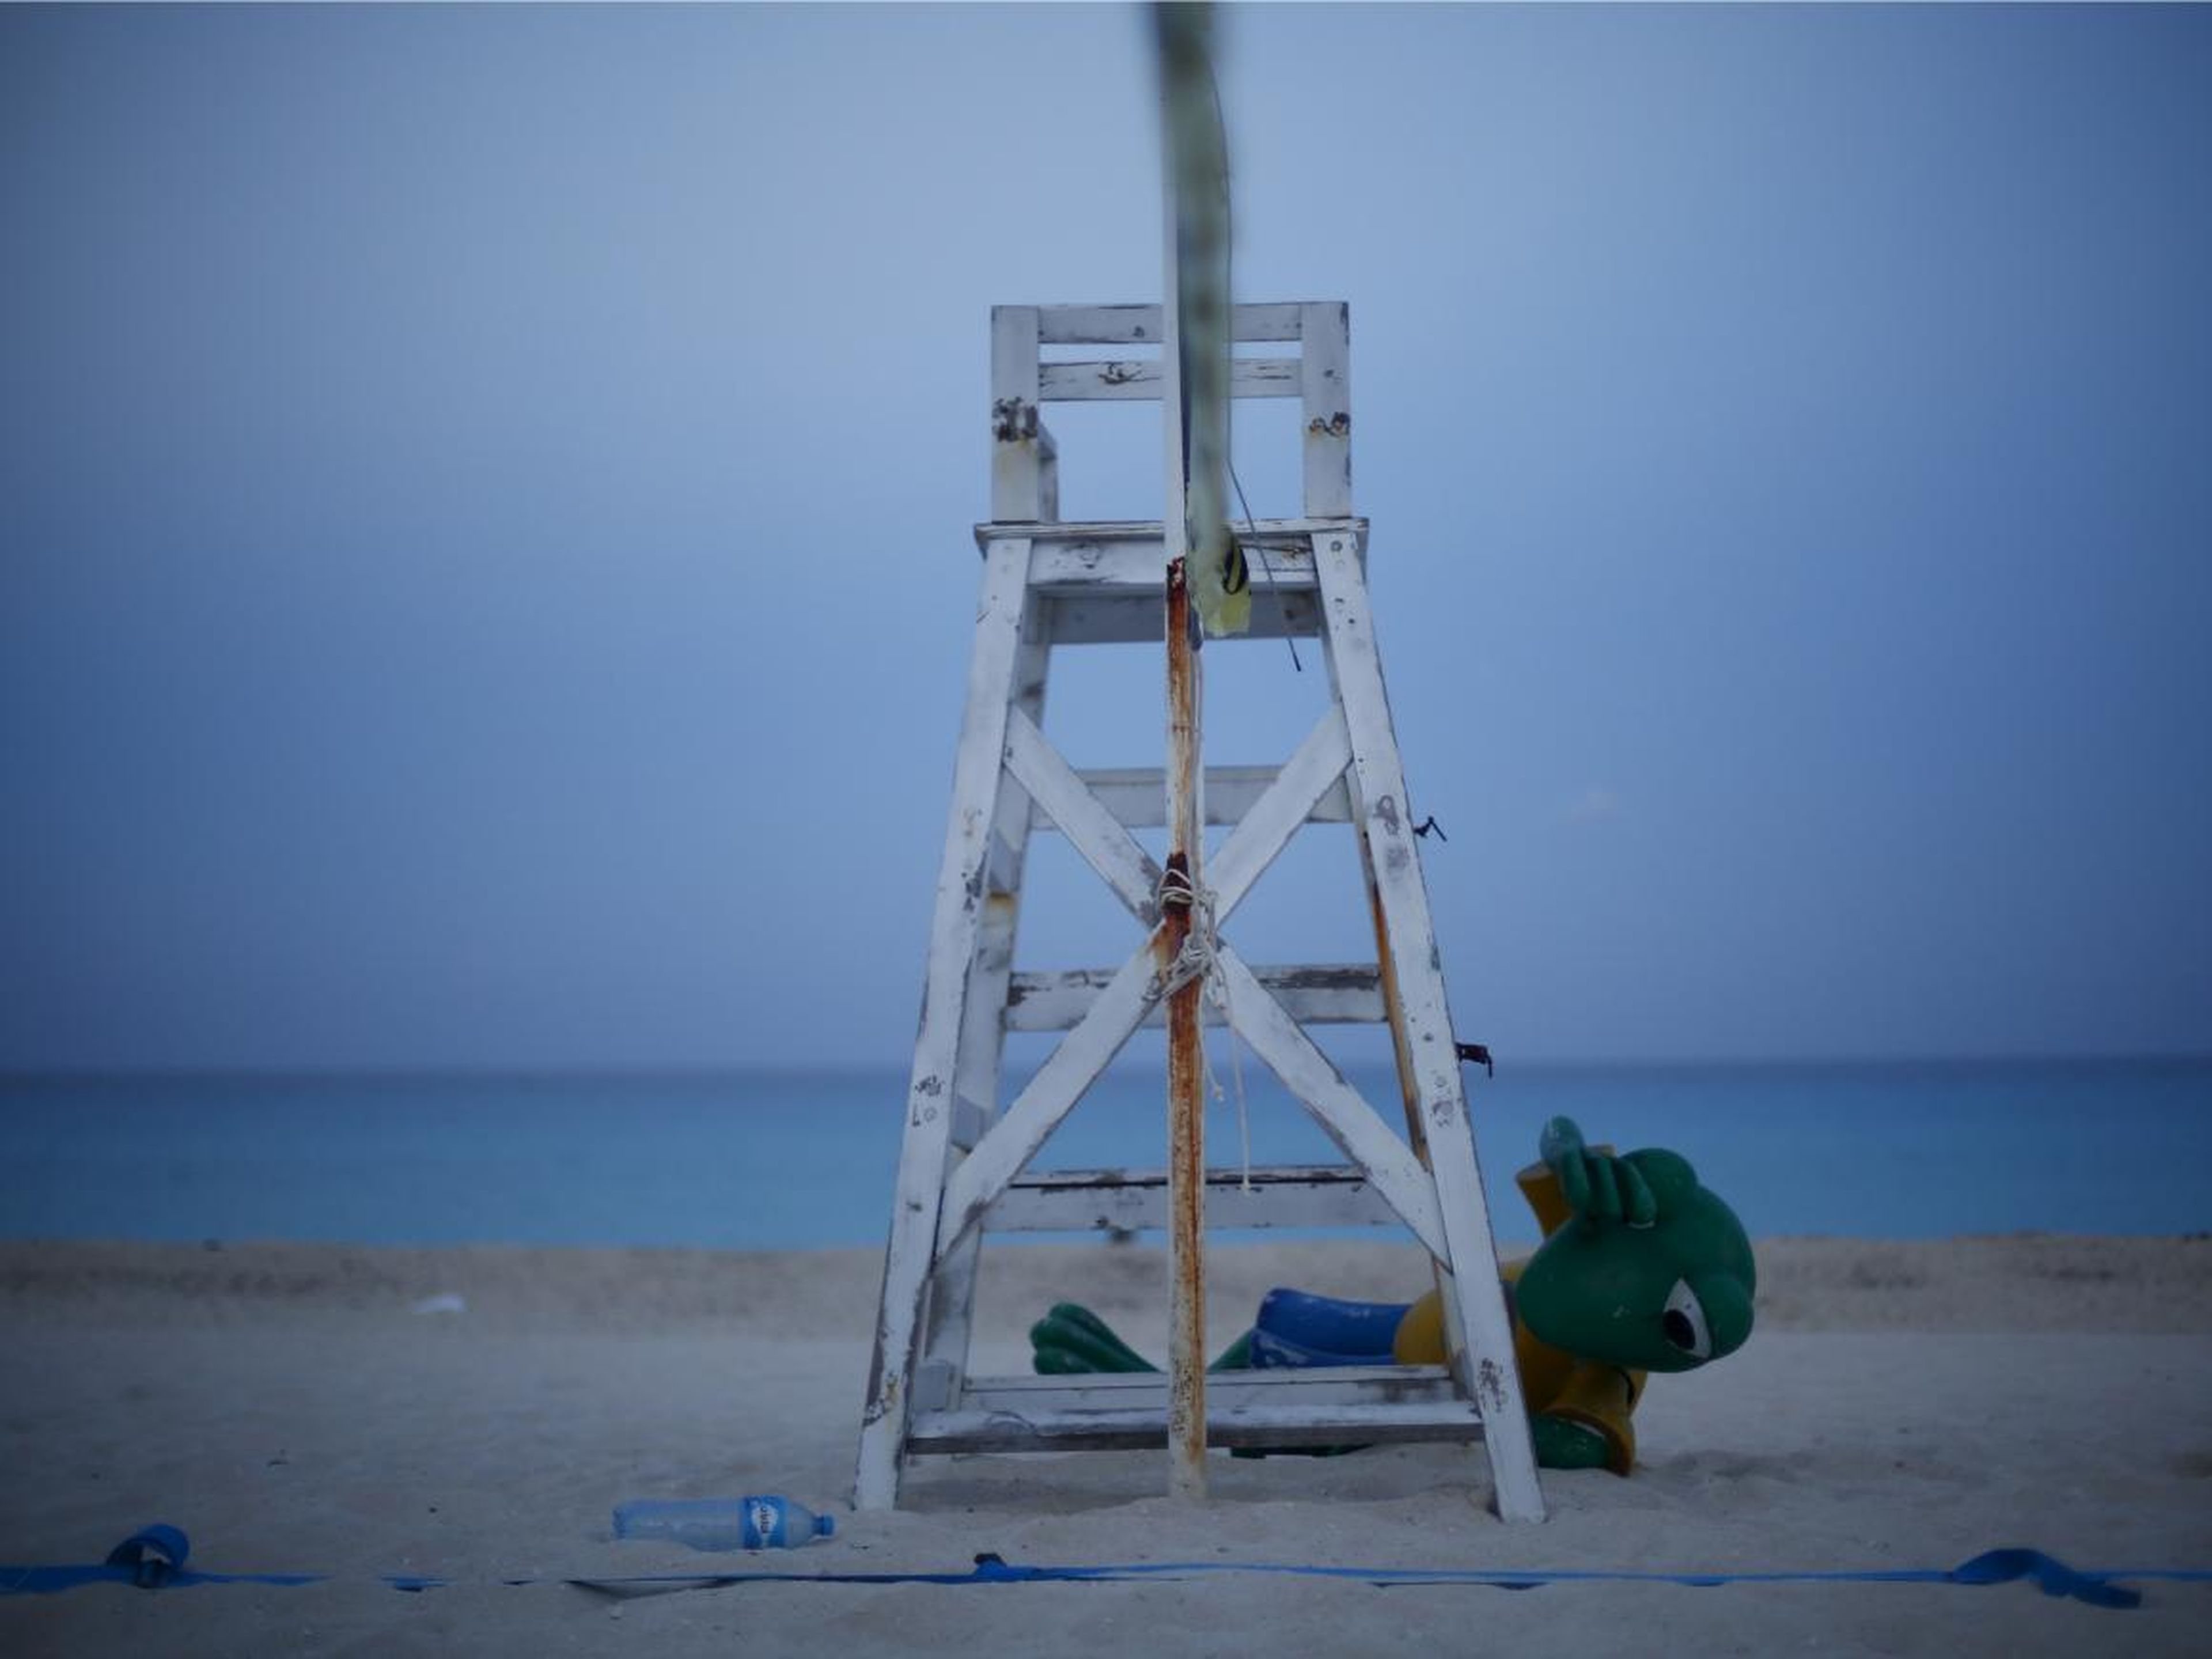 Locals blame rapidly increasing tourism for the damage that’s been done to Cancún’s beaches.